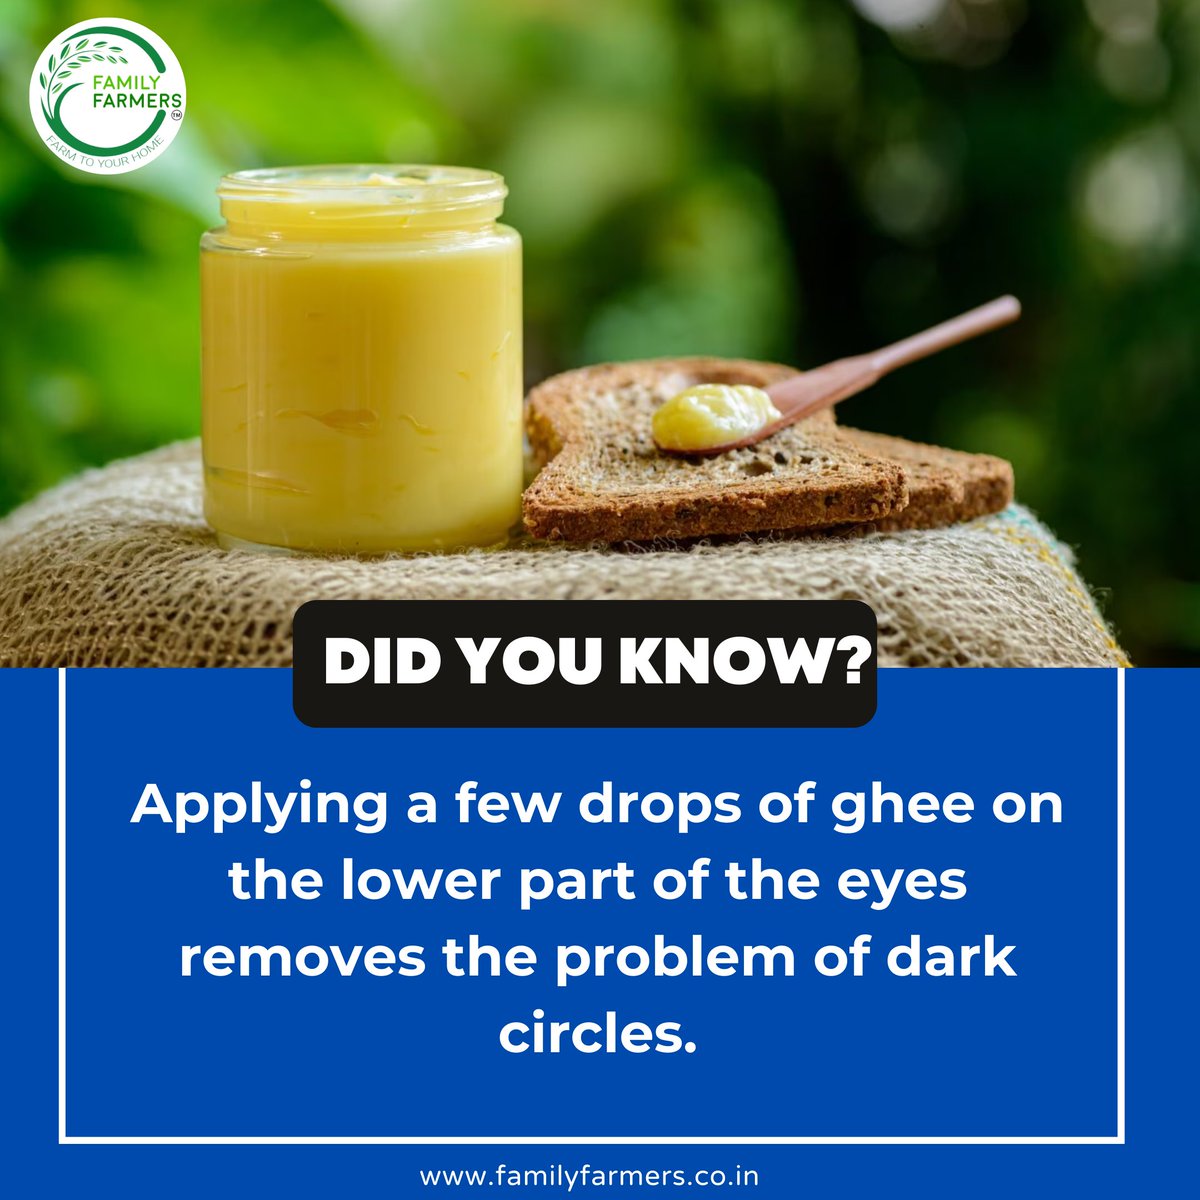 Did you know?
. 
. Share with your friend more info or tag Double tap for share + Tag your friends
. 
. 
. #didyouknow #healthyfacts #healthtips #eyehealthtips #skincaretips #skinhealt #wellbeans #naturalmakeup #healthyfats #beauty #facepacks #facemask #healthylifestyle